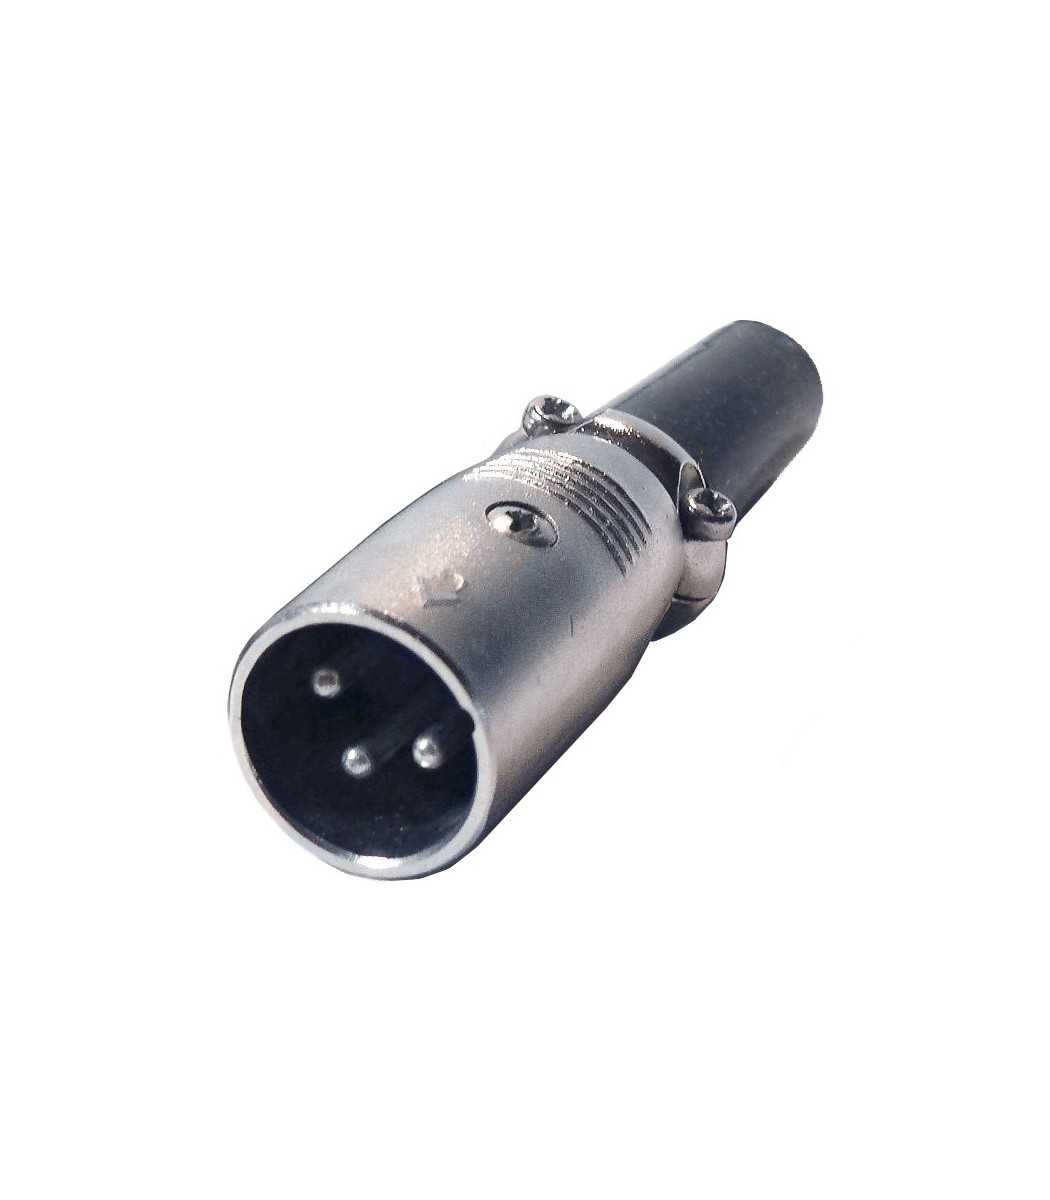 XLR Audio Connector, 3 Contacts, Plug, Cable Mount